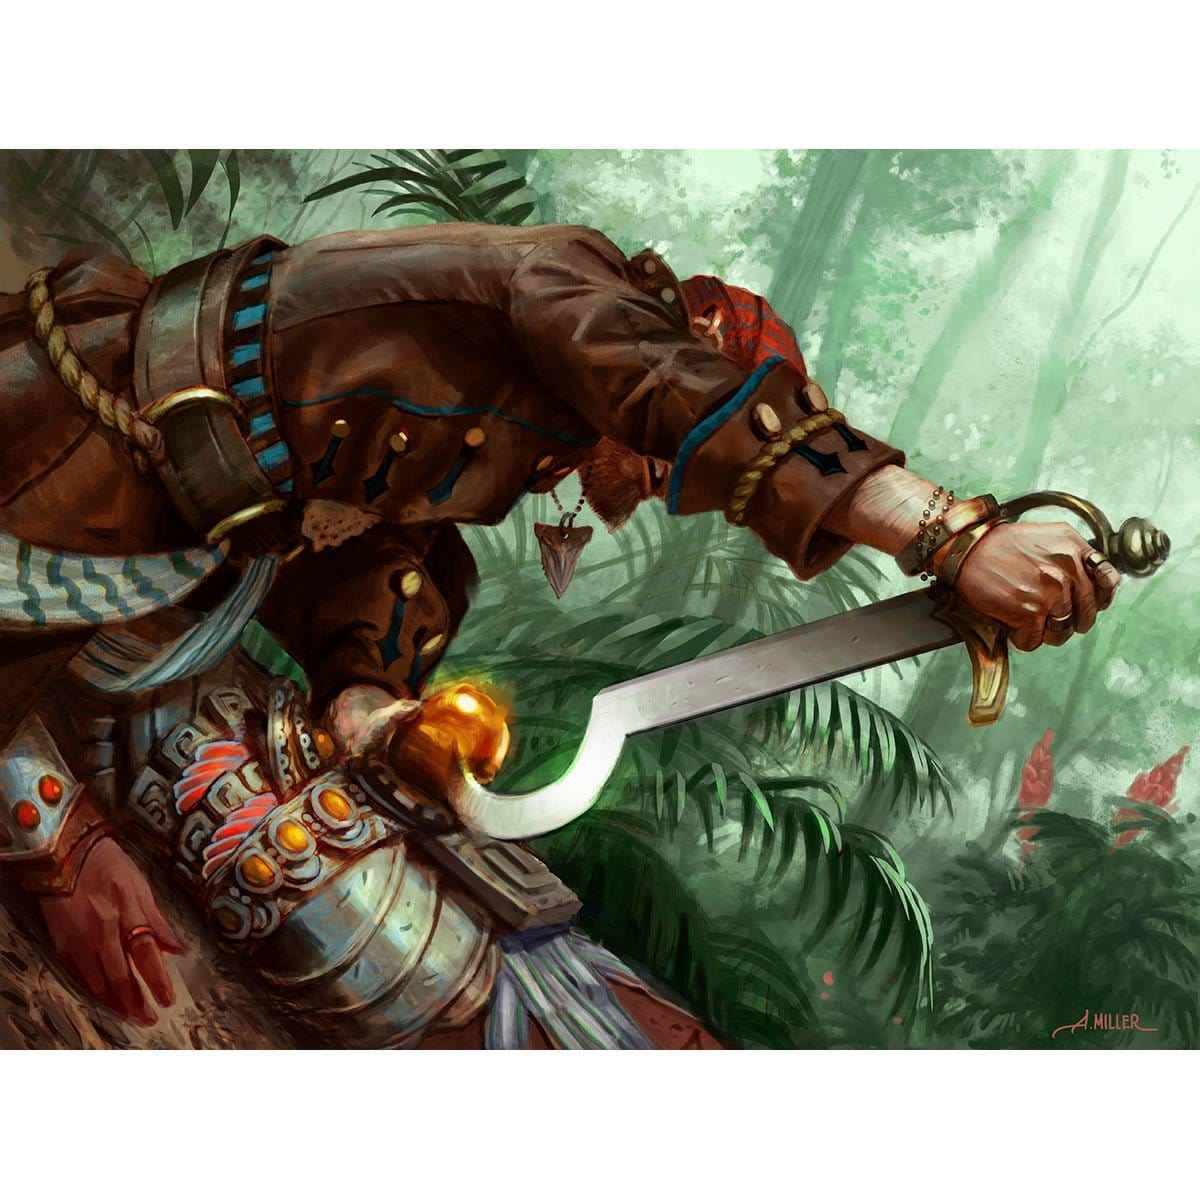 Prying Blade Print - Print - Original Magic Art - Accessories for Magic the Gathering and other card games